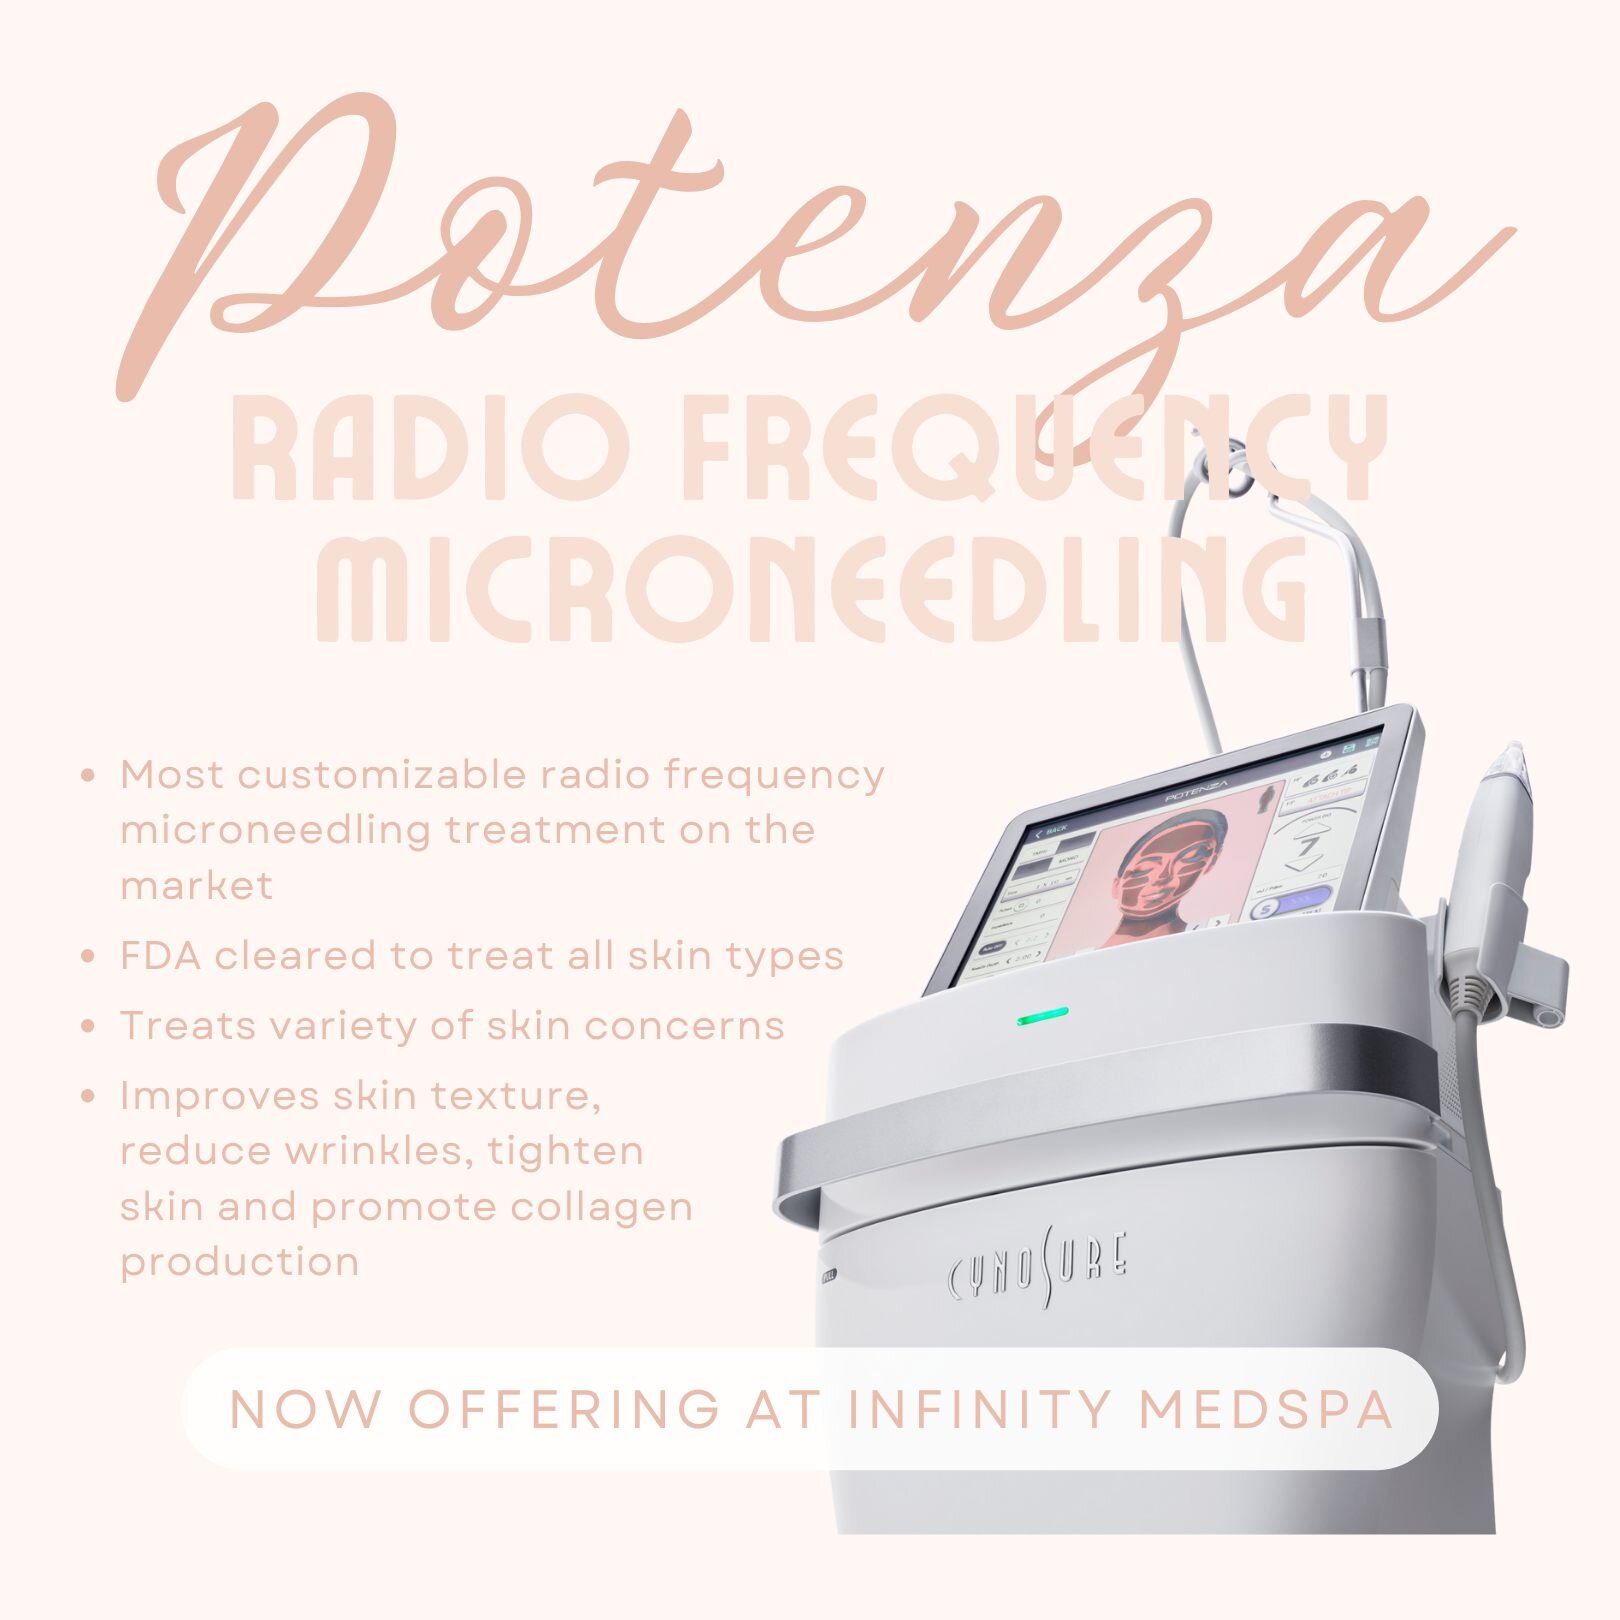 ⭐NOW OFFERING POTENZA RF MICRONEEDLING!⭐

The most customizable radio frequency microneedling treatment on the market!

The Potenza takes microneedling to the next level with having 4 different modes of treatment - monopolar, bipolar, 1Mhz and 2Mhz w